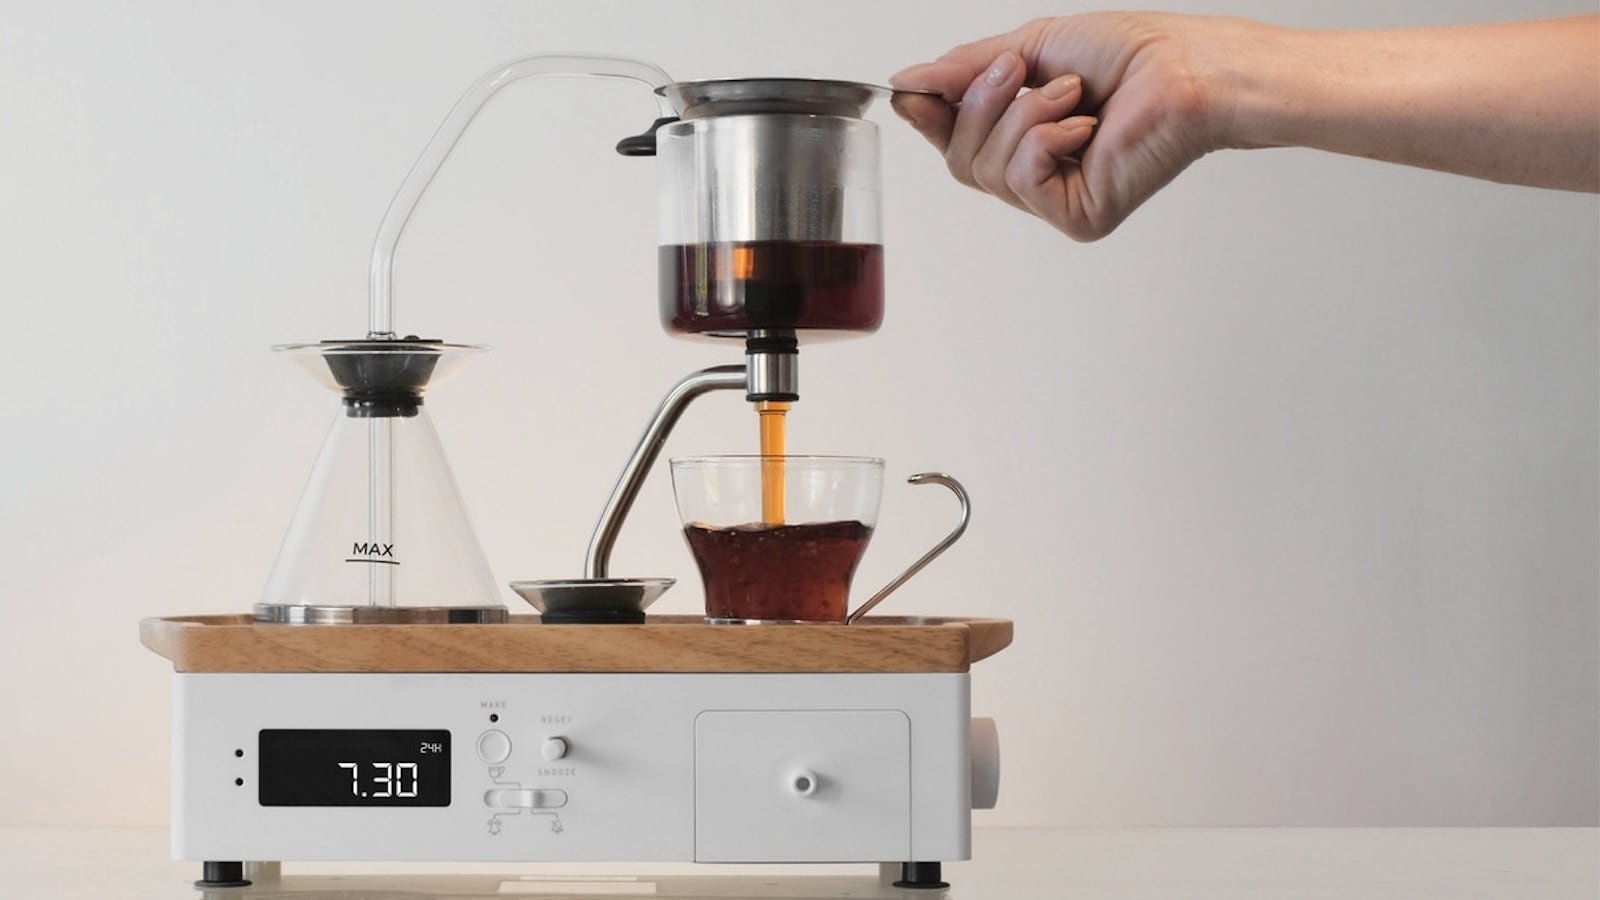 Joy Resolve Barisieur 2.0 immersion brewer alarm clock brews coffee and tea while wirelessly charging